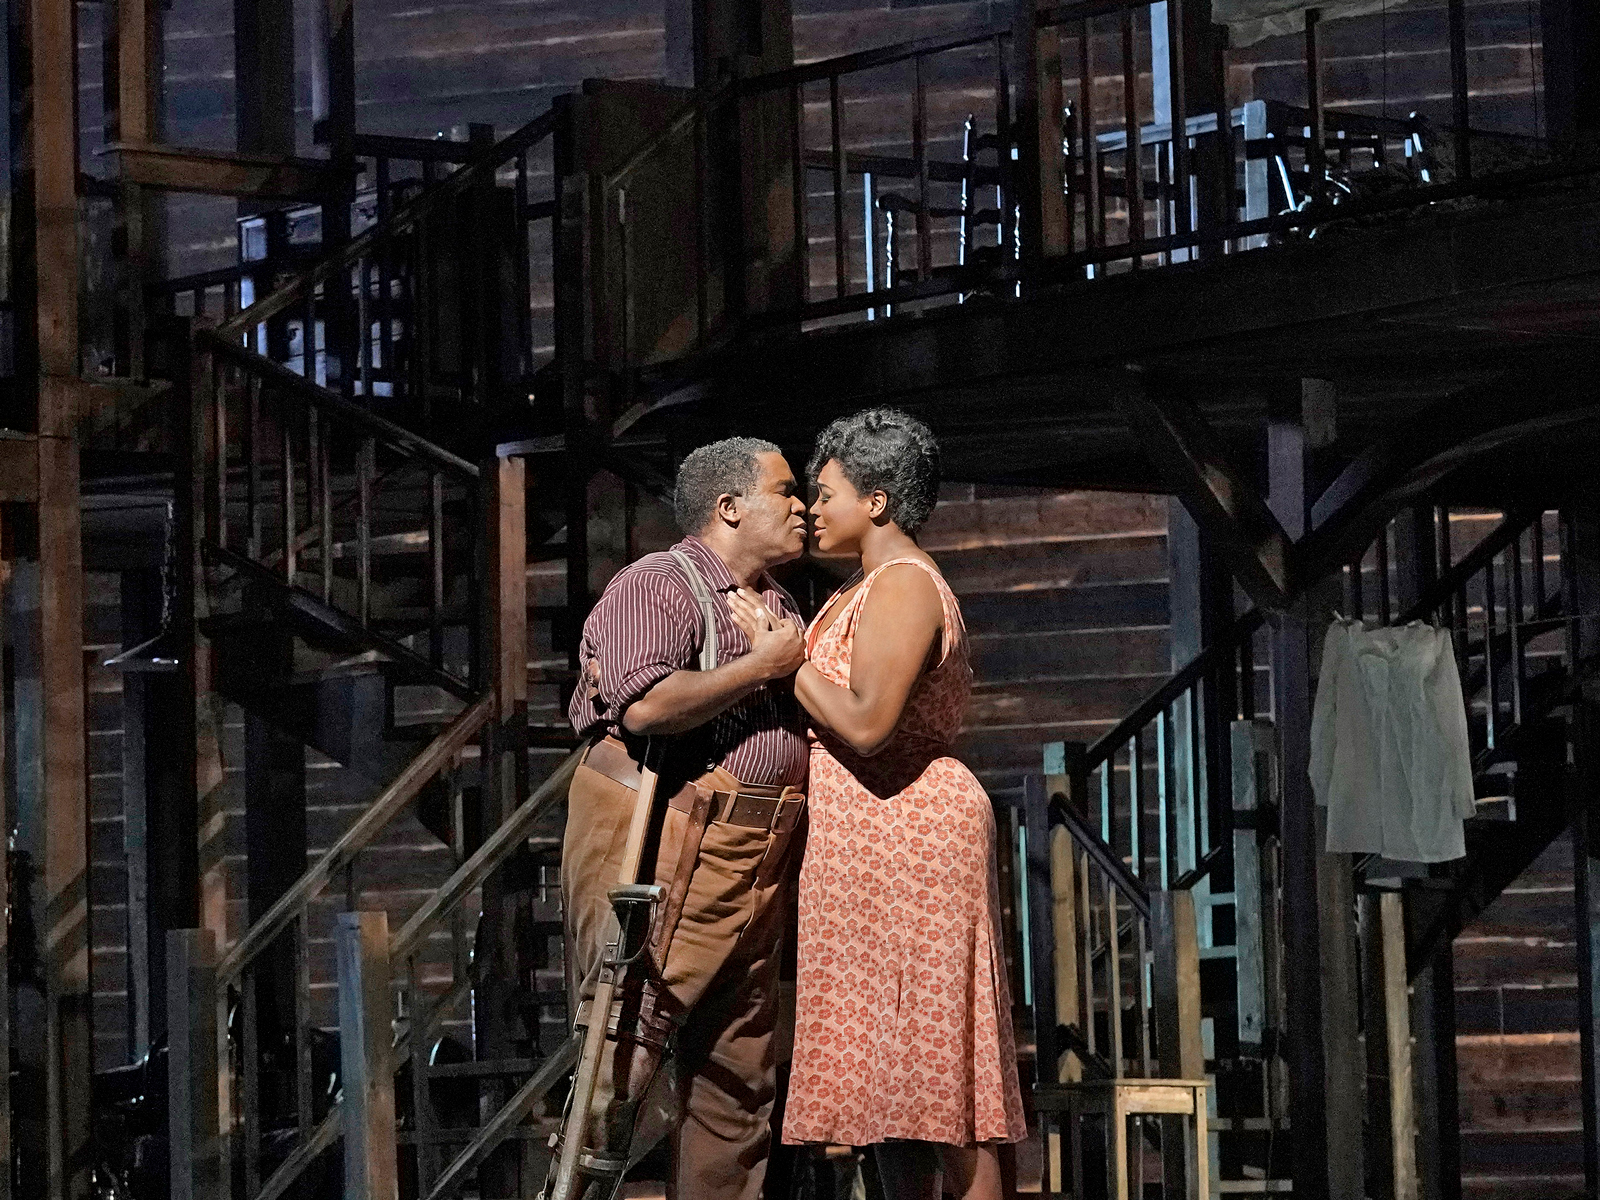 A scene from The Gershwins' Porgy and Bess